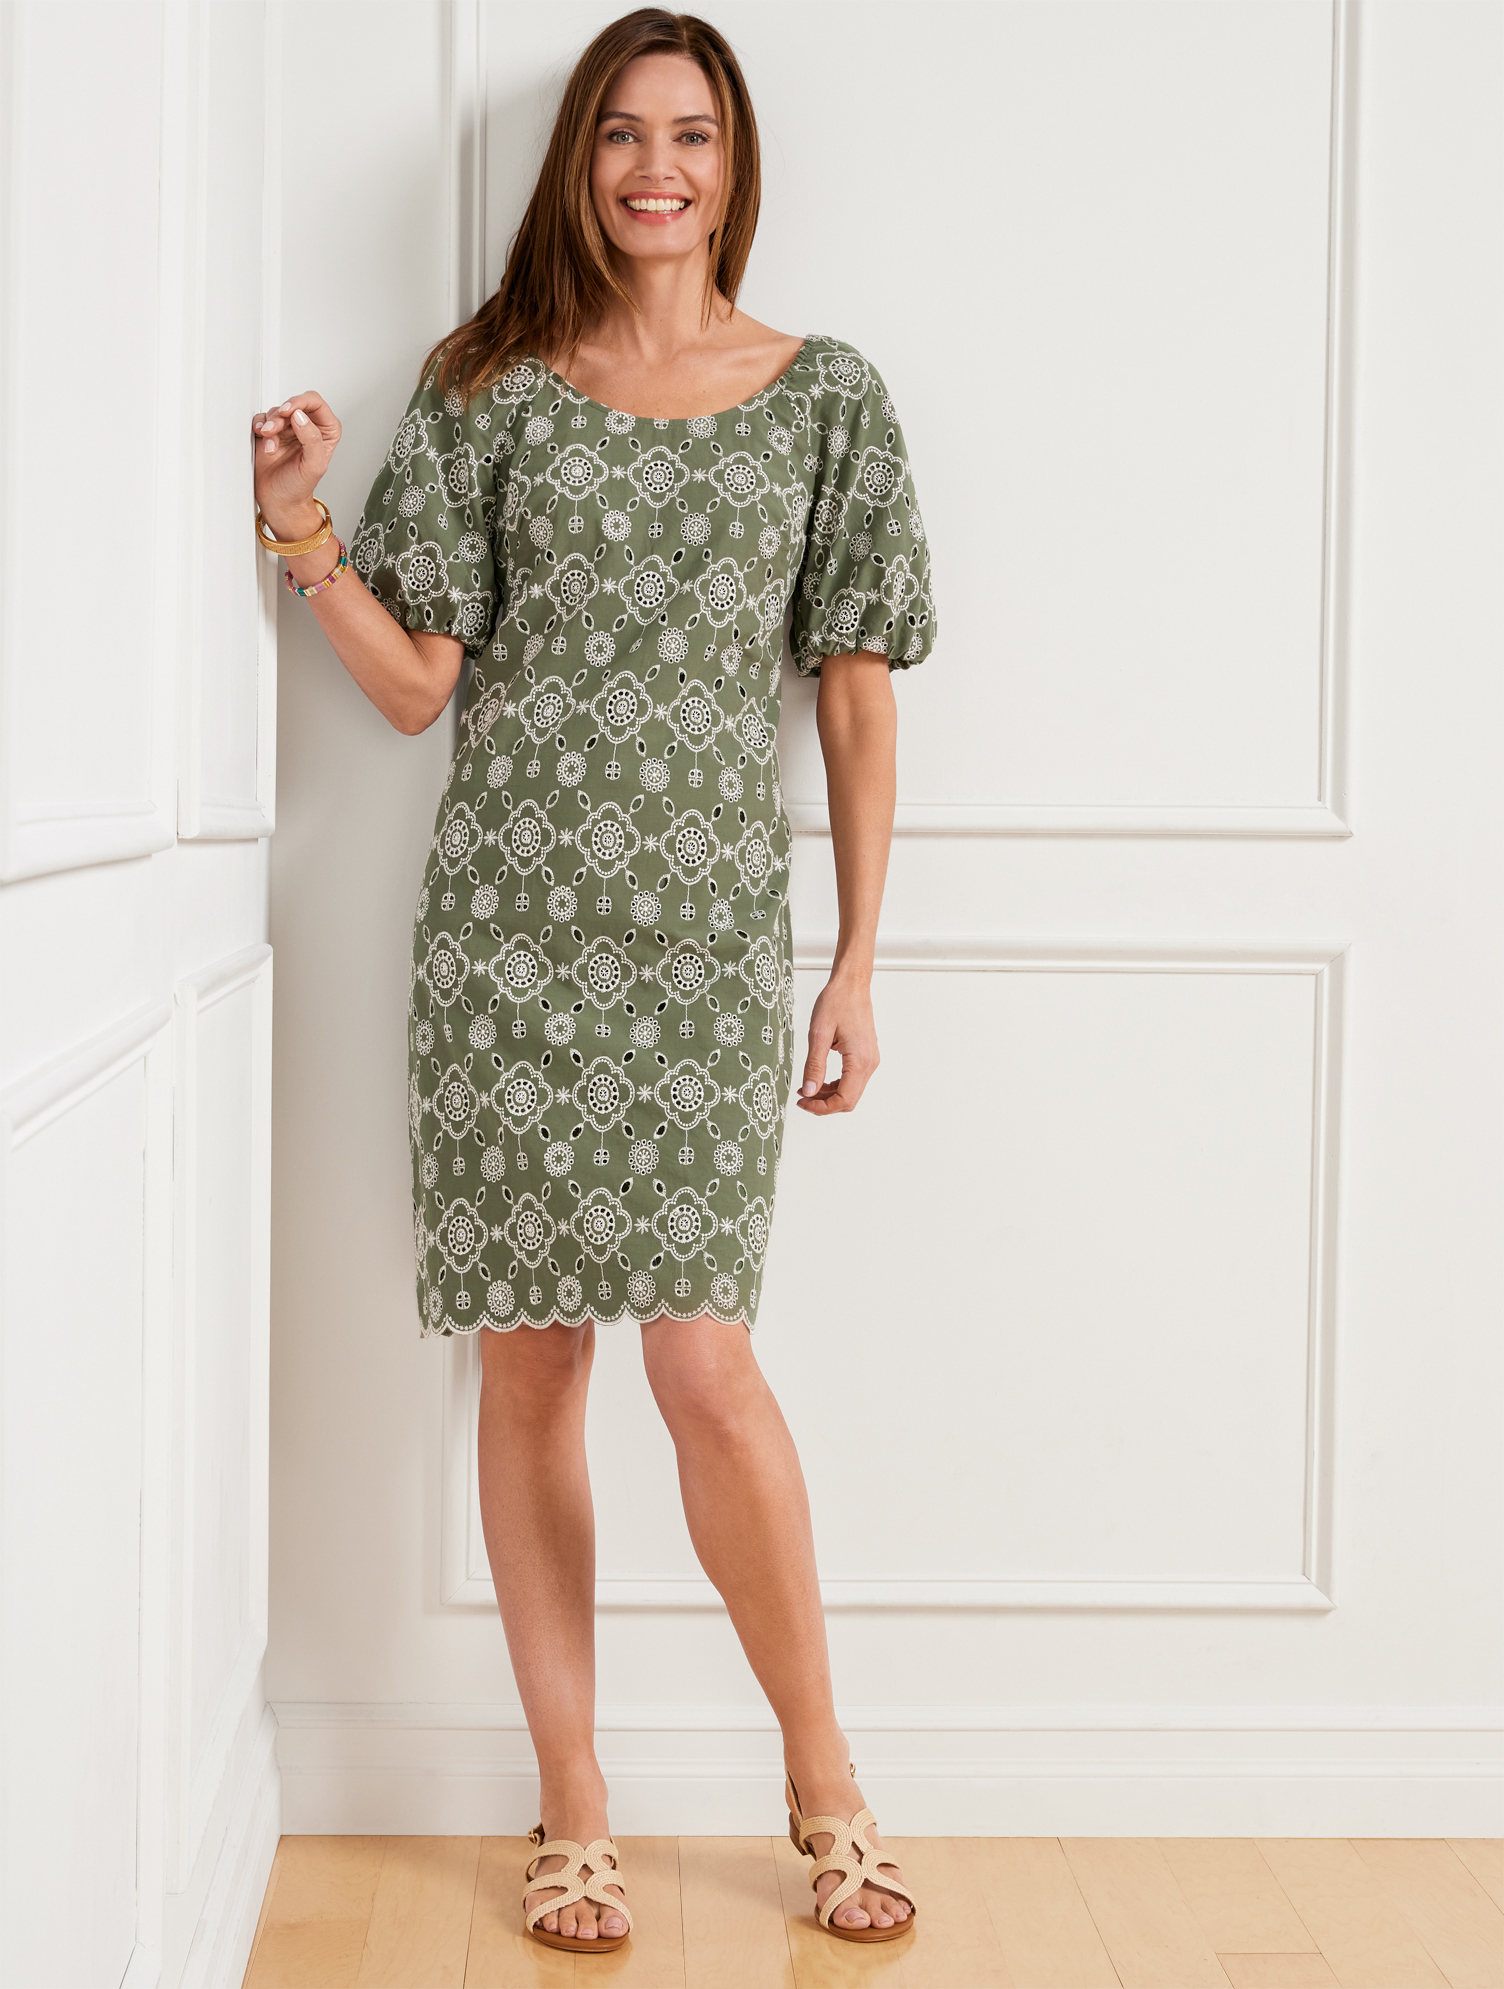 Talbots Puff Sleeve Embroidered Shift Dress - Spring Moss/white - 10 - 100% Cotton  In Spring Moss,white